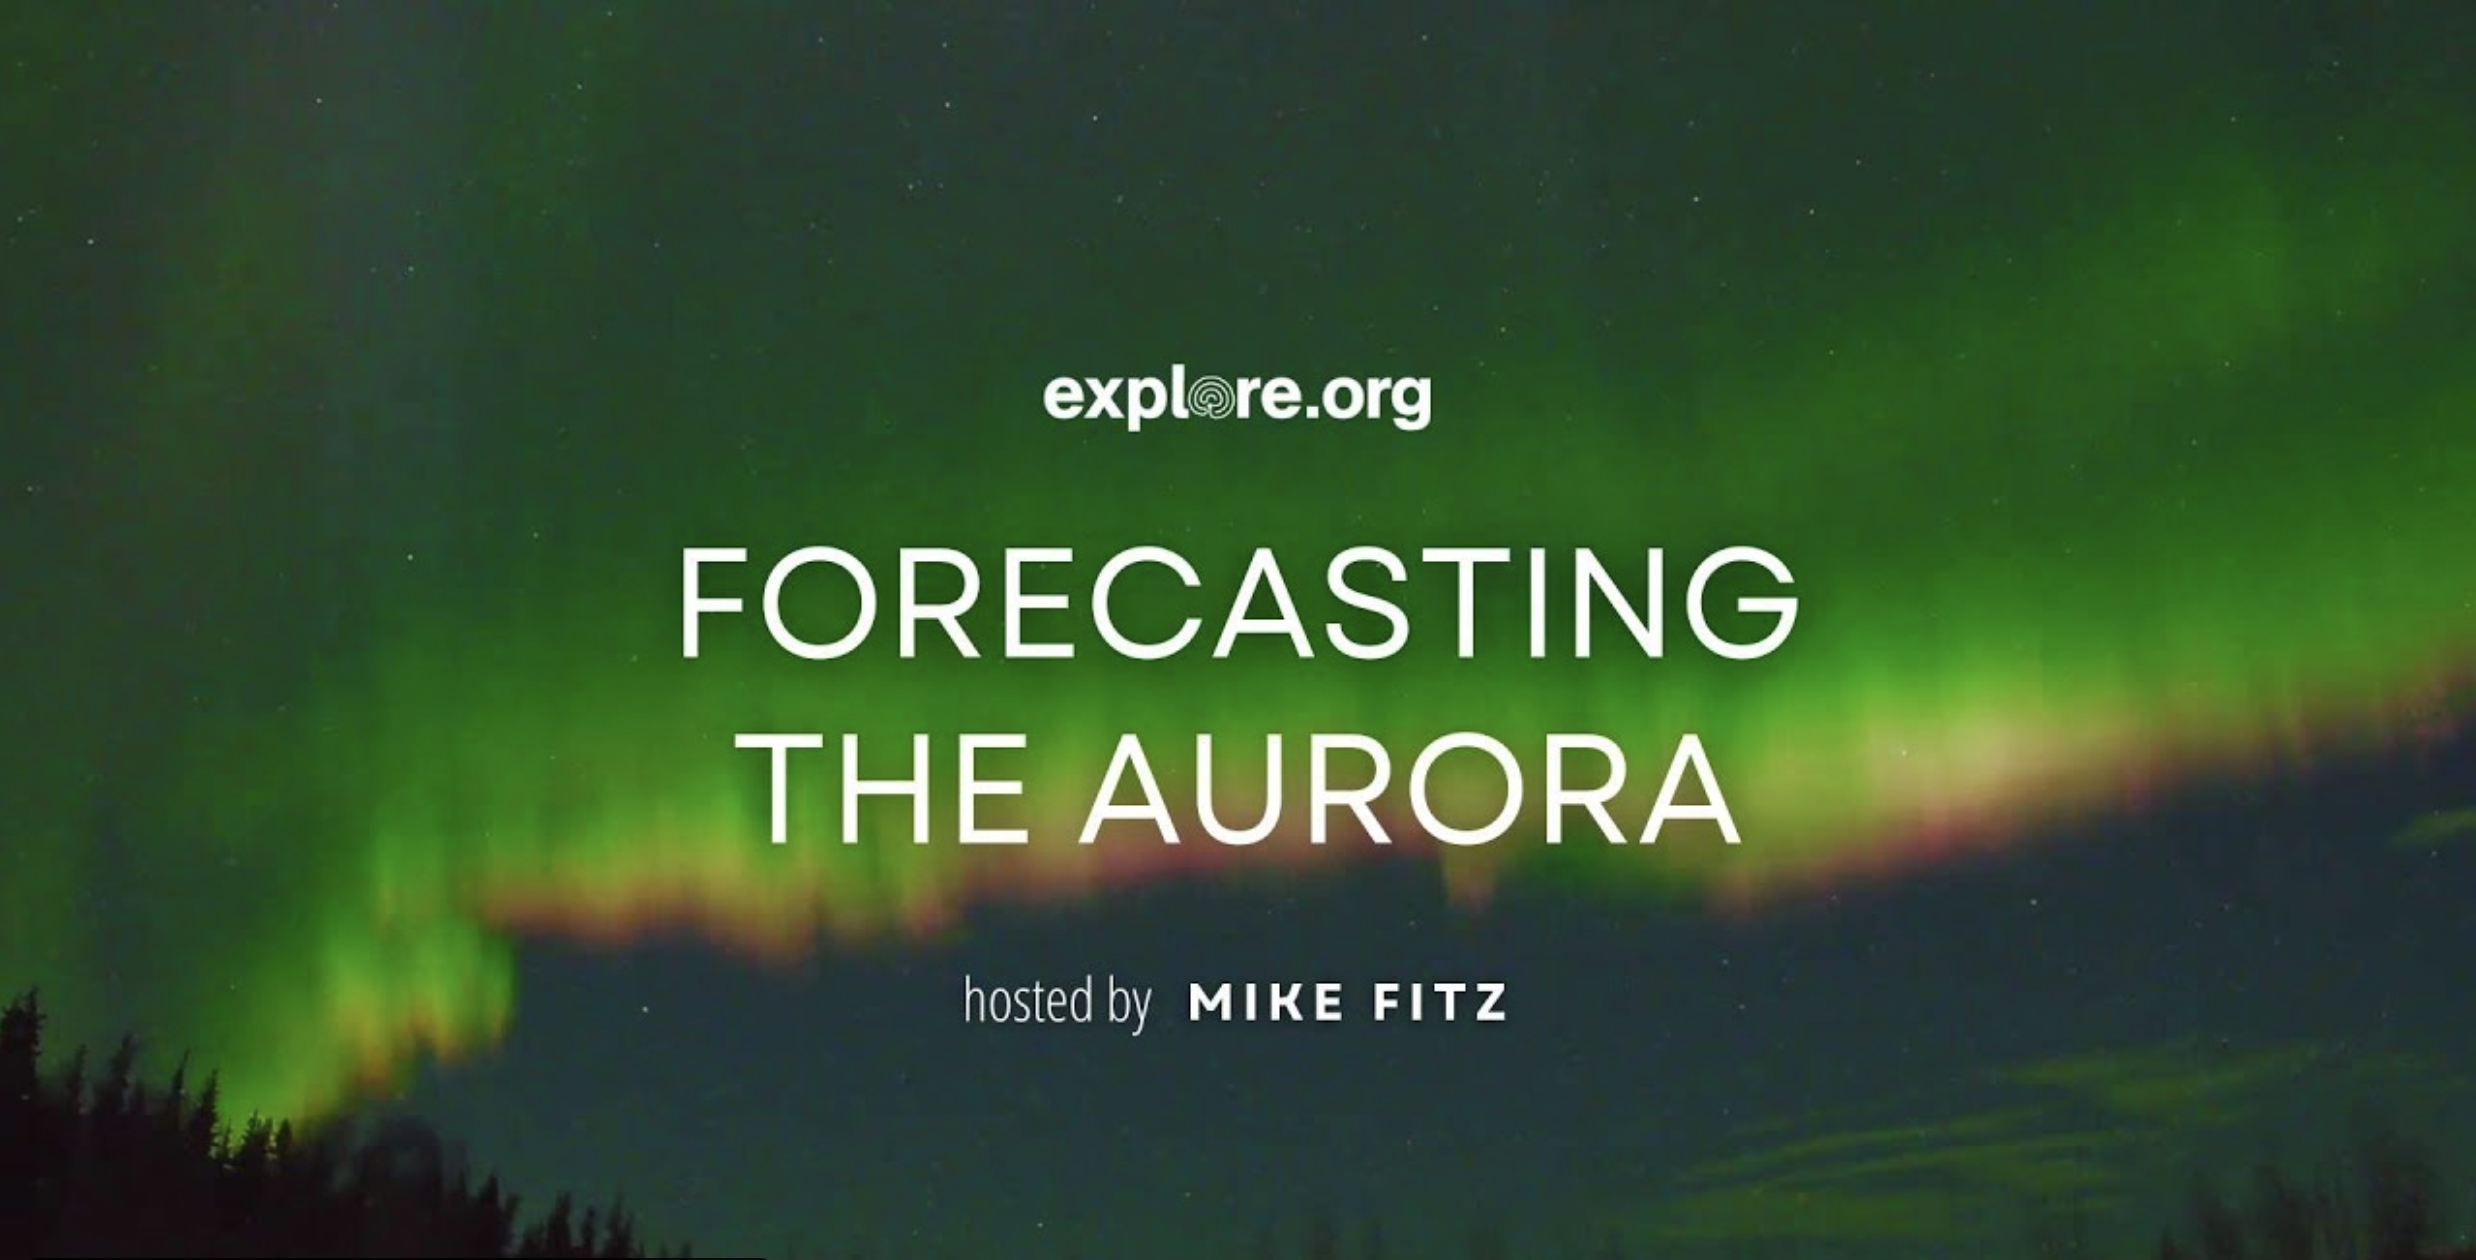 A photo of the aurora with white words reading "forecasting the aurora" and "hosted by Mike Fitz"